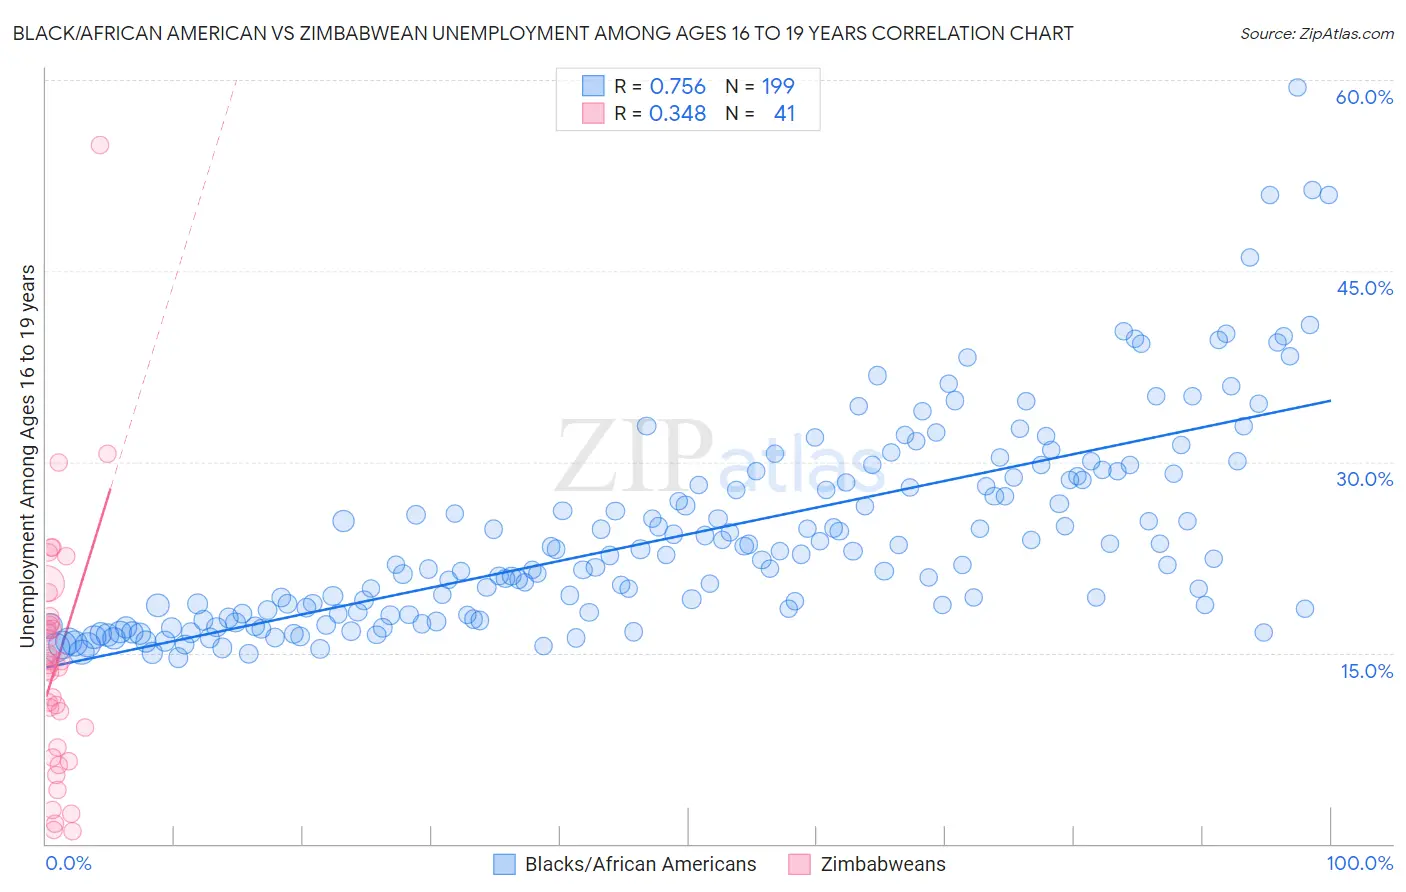 Black/African American vs Zimbabwean Unemployment Among Ages 16 to 19 years